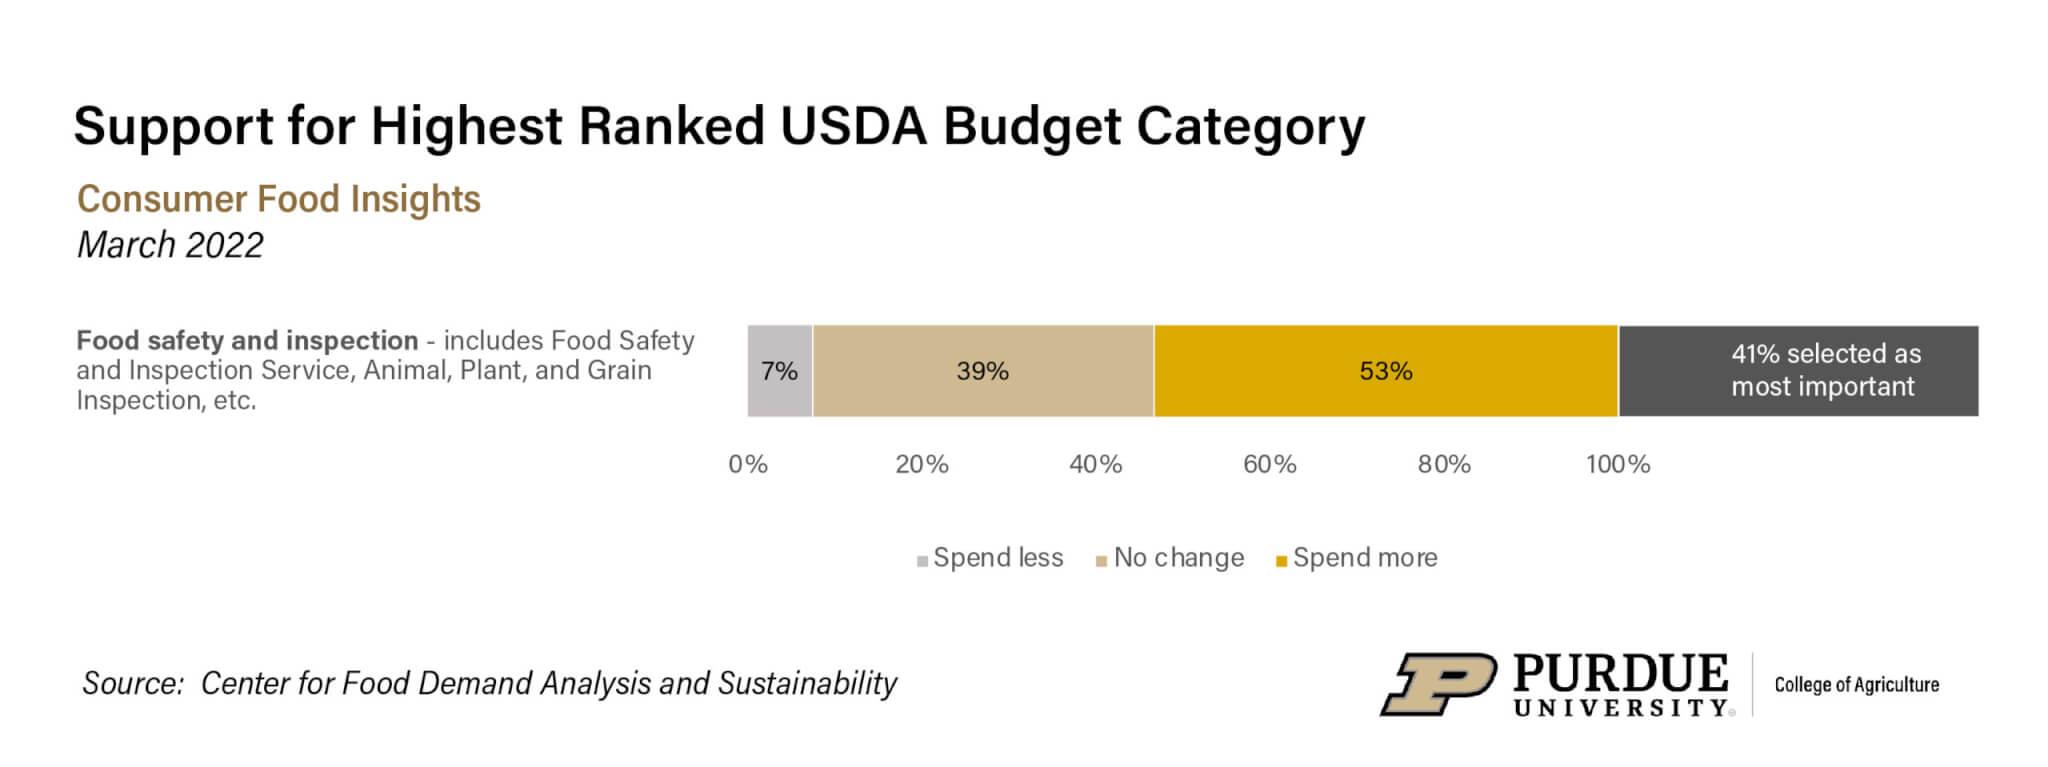 Consumers ranked food safety and inspection as the most important USDA budget category